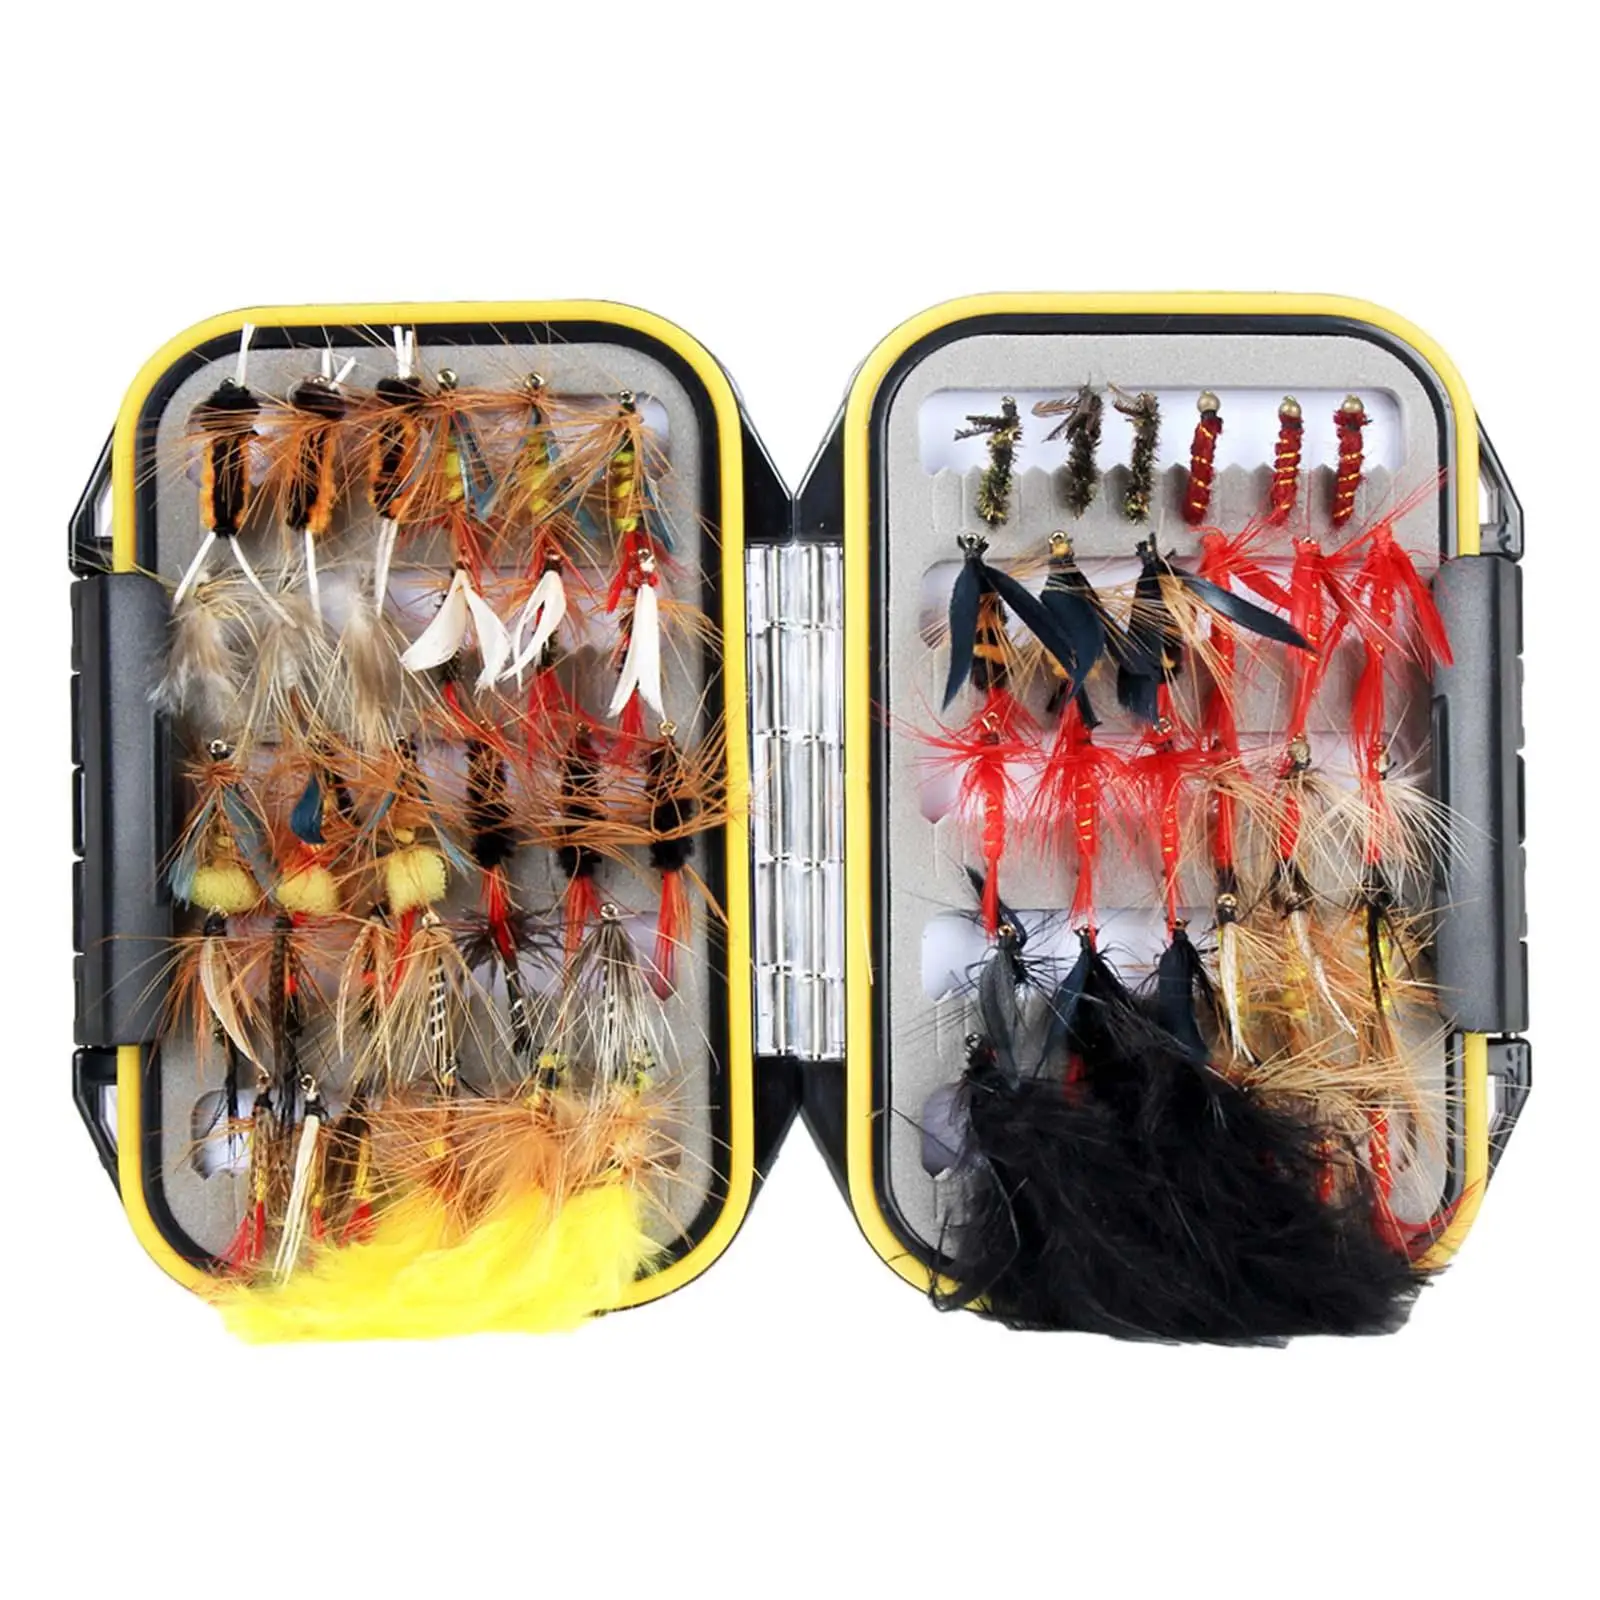 60 Pieces Fly Fishing Baits with Storage Box Fishing Lures Fishing Tools for